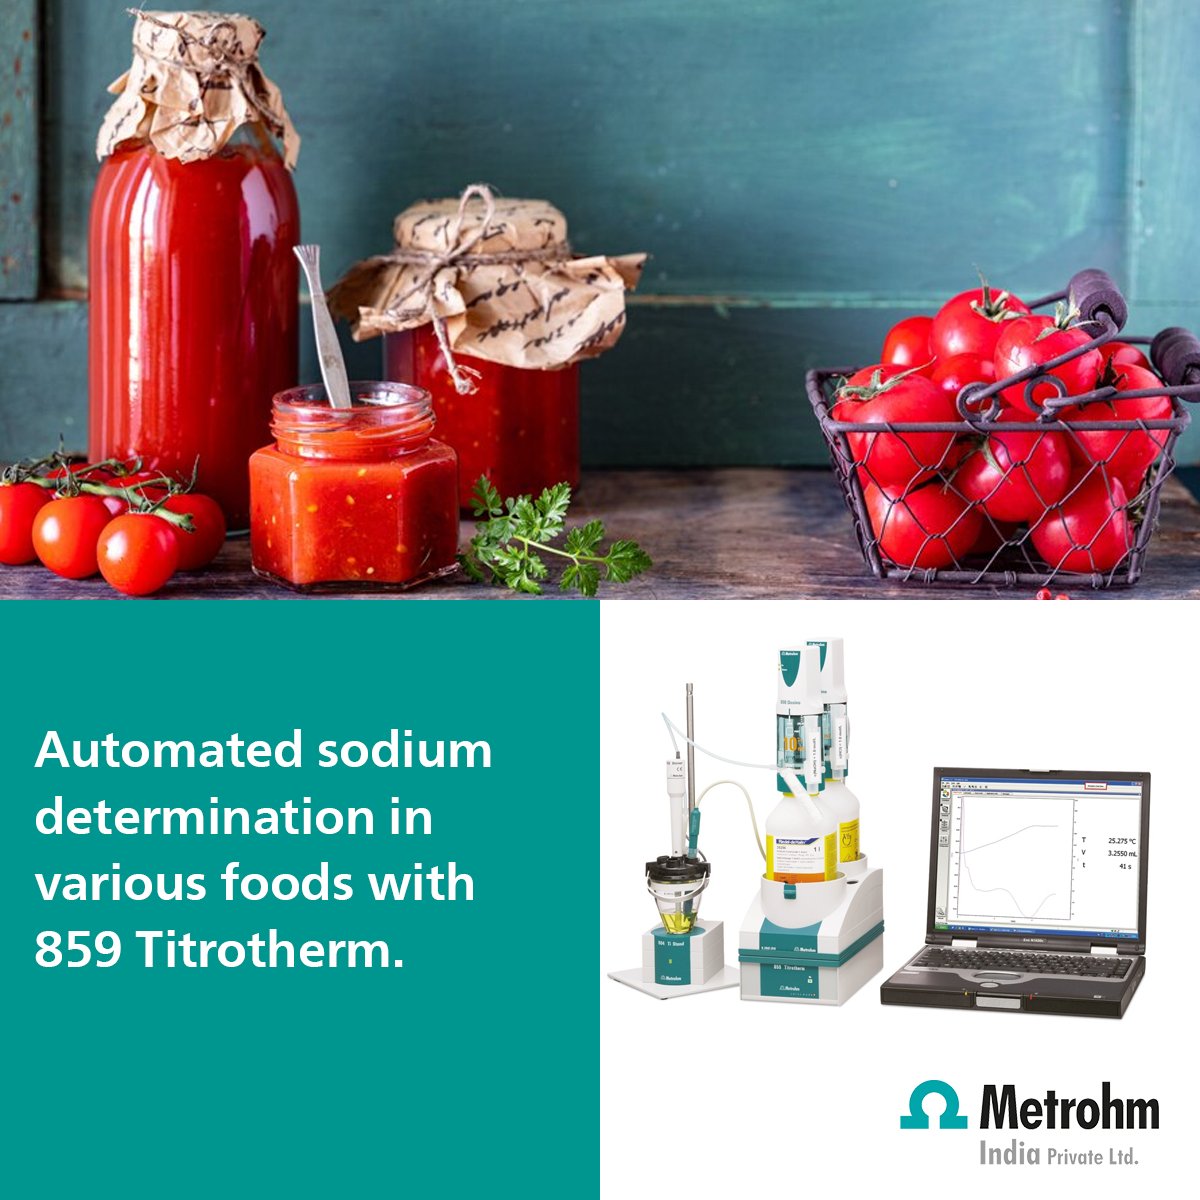 Explore the Science of Sodium Determination in Foods with our acidic solution of NH4F * HF, Al(NO3)3 / KNO3! Check out the process in our app video. #AnalyticalChemistry #FoodAnalysis #Metrohm #MetrohmIndia #Titration #Titrator #ThermometricTitration